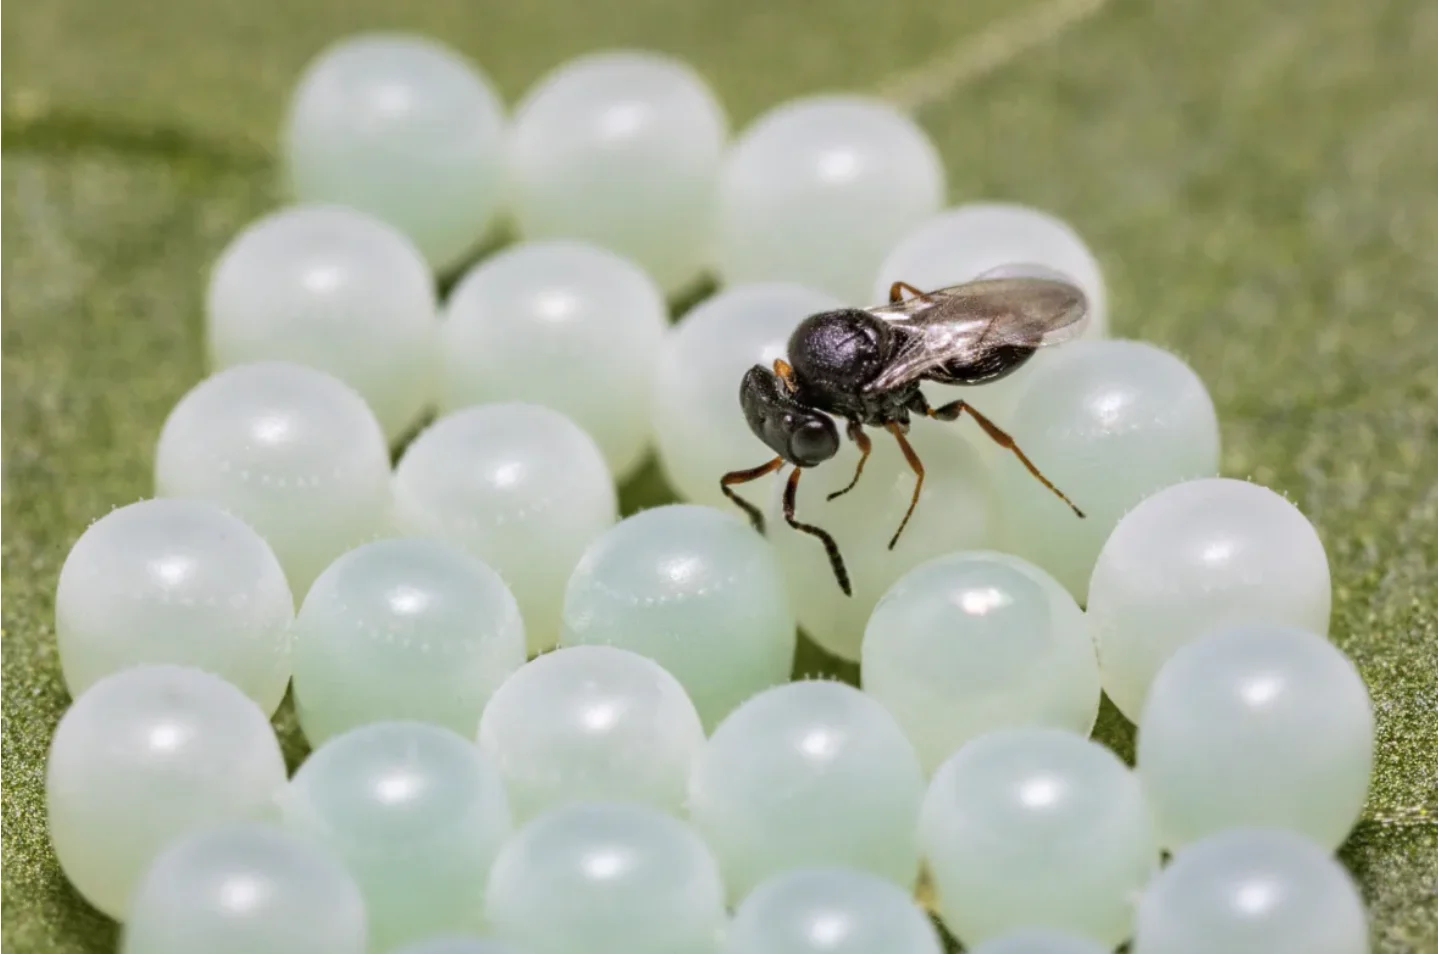 CBC: A samurai wasp inspects brown marmorated stink bug eggs as it prepares to lay its own eggs inside. Researchers in B.C. hope the parasitic wasp can help drive down stink bug populations before the invasive species does greater damage to crops and gardens. (Warren Wong)